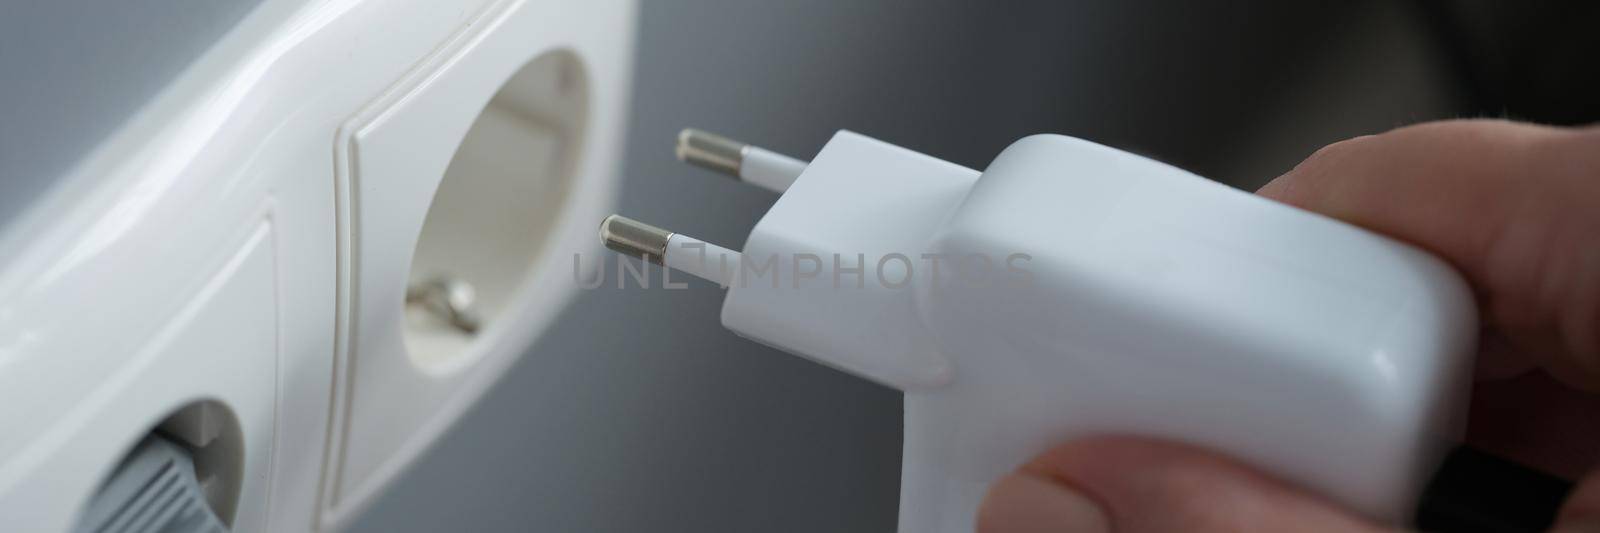 Female hands plug the charger into an outlet in the wall, close-up. Power plug. Electricity in household. Device in socket